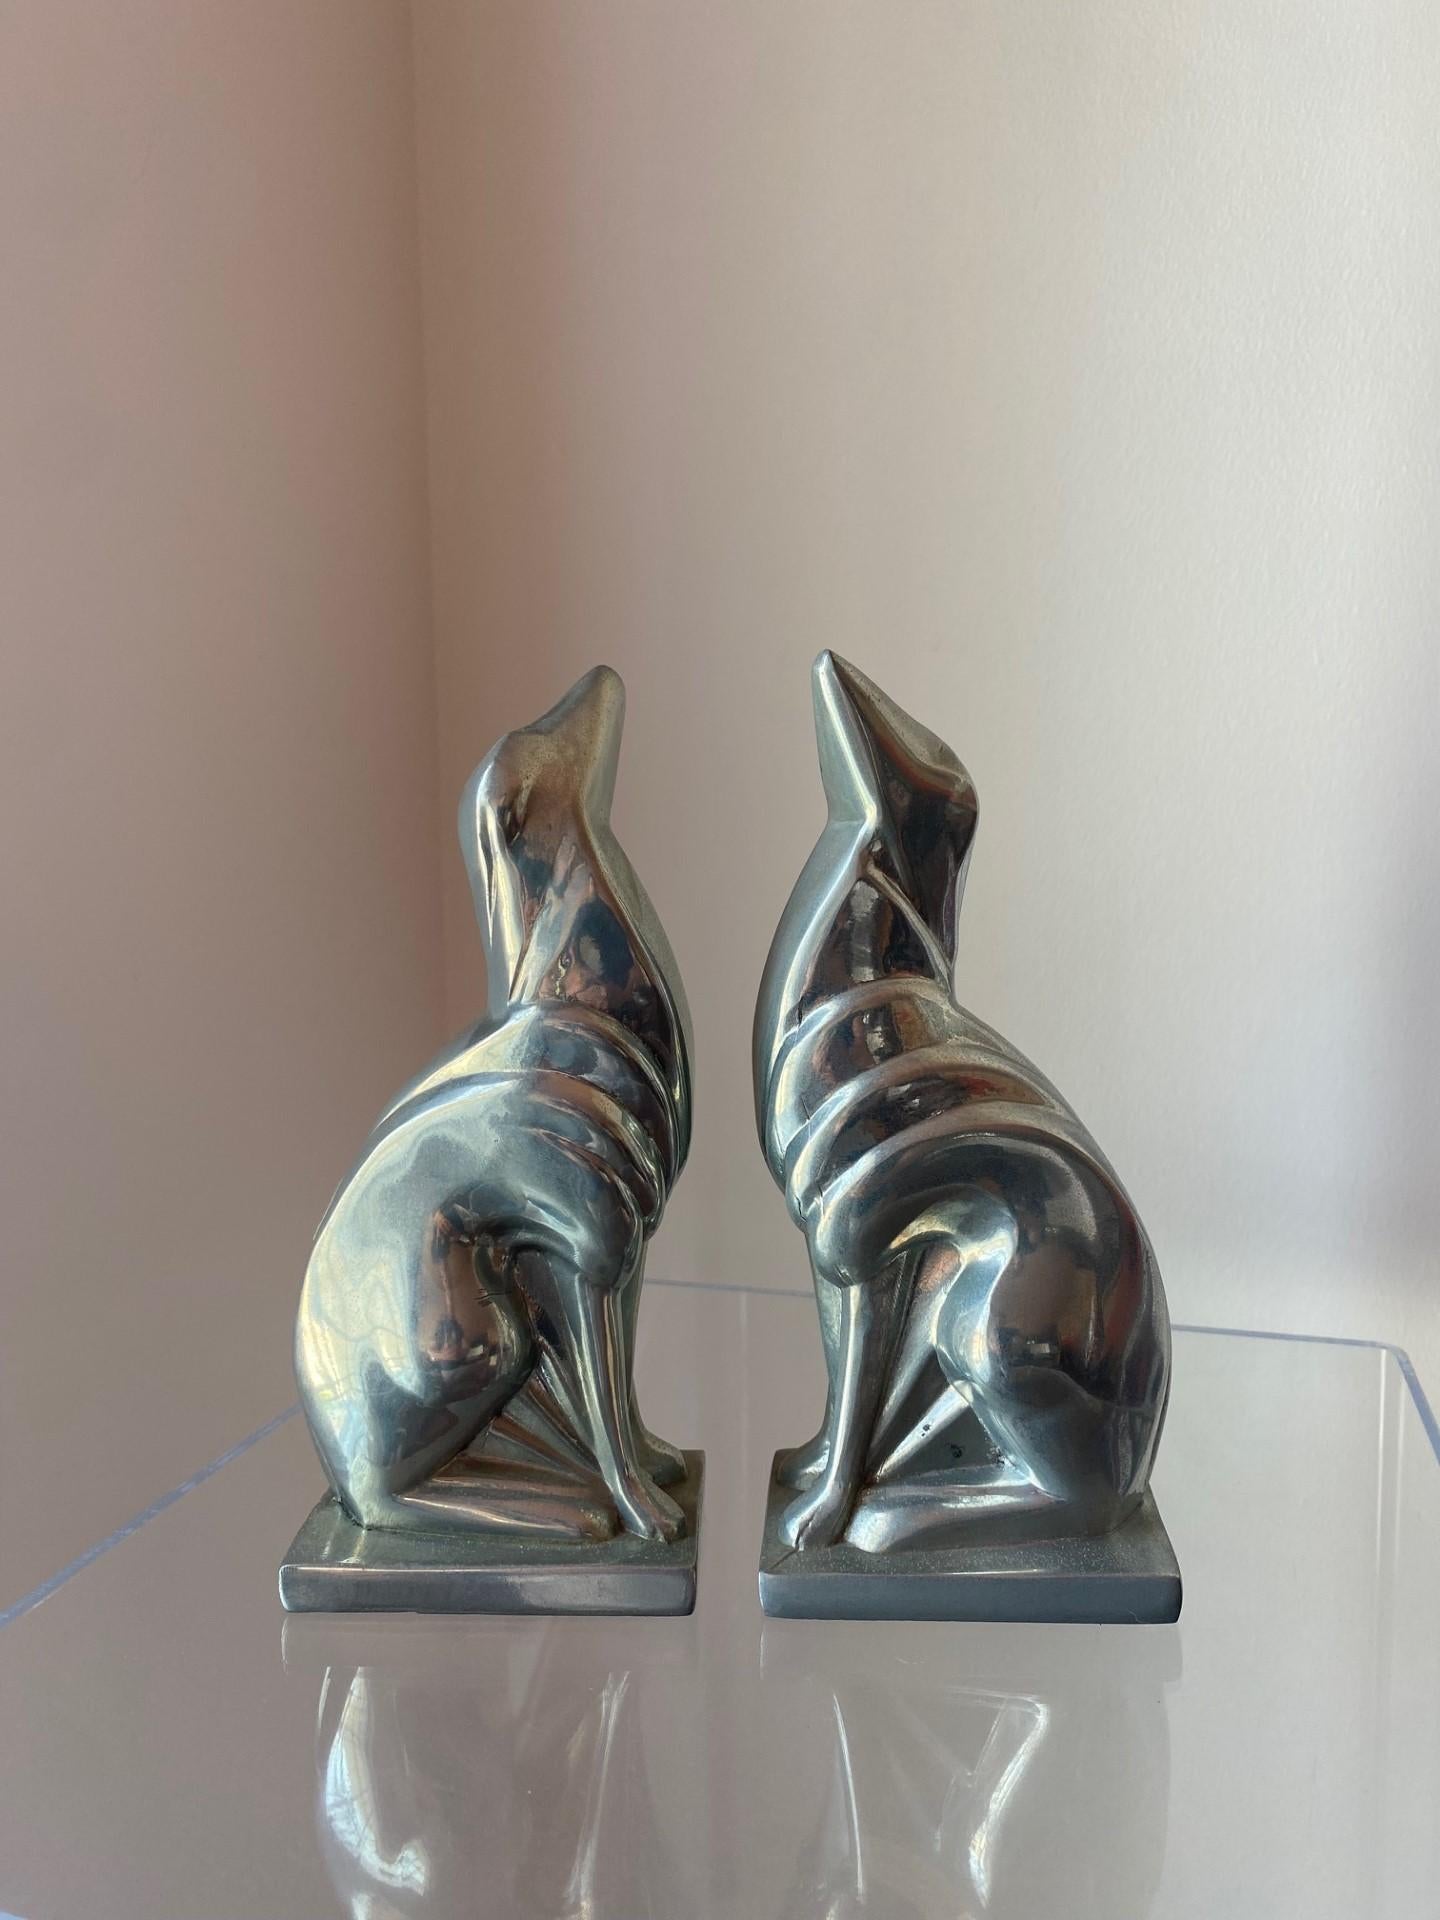 Beautiful and original set of bookends from Frankart. This set is genuine from the early days of this Brooklyn manufacturer.  This art deco representation Russian greyhounds brings to life the stylized realization in art deco.  Art Deco combined